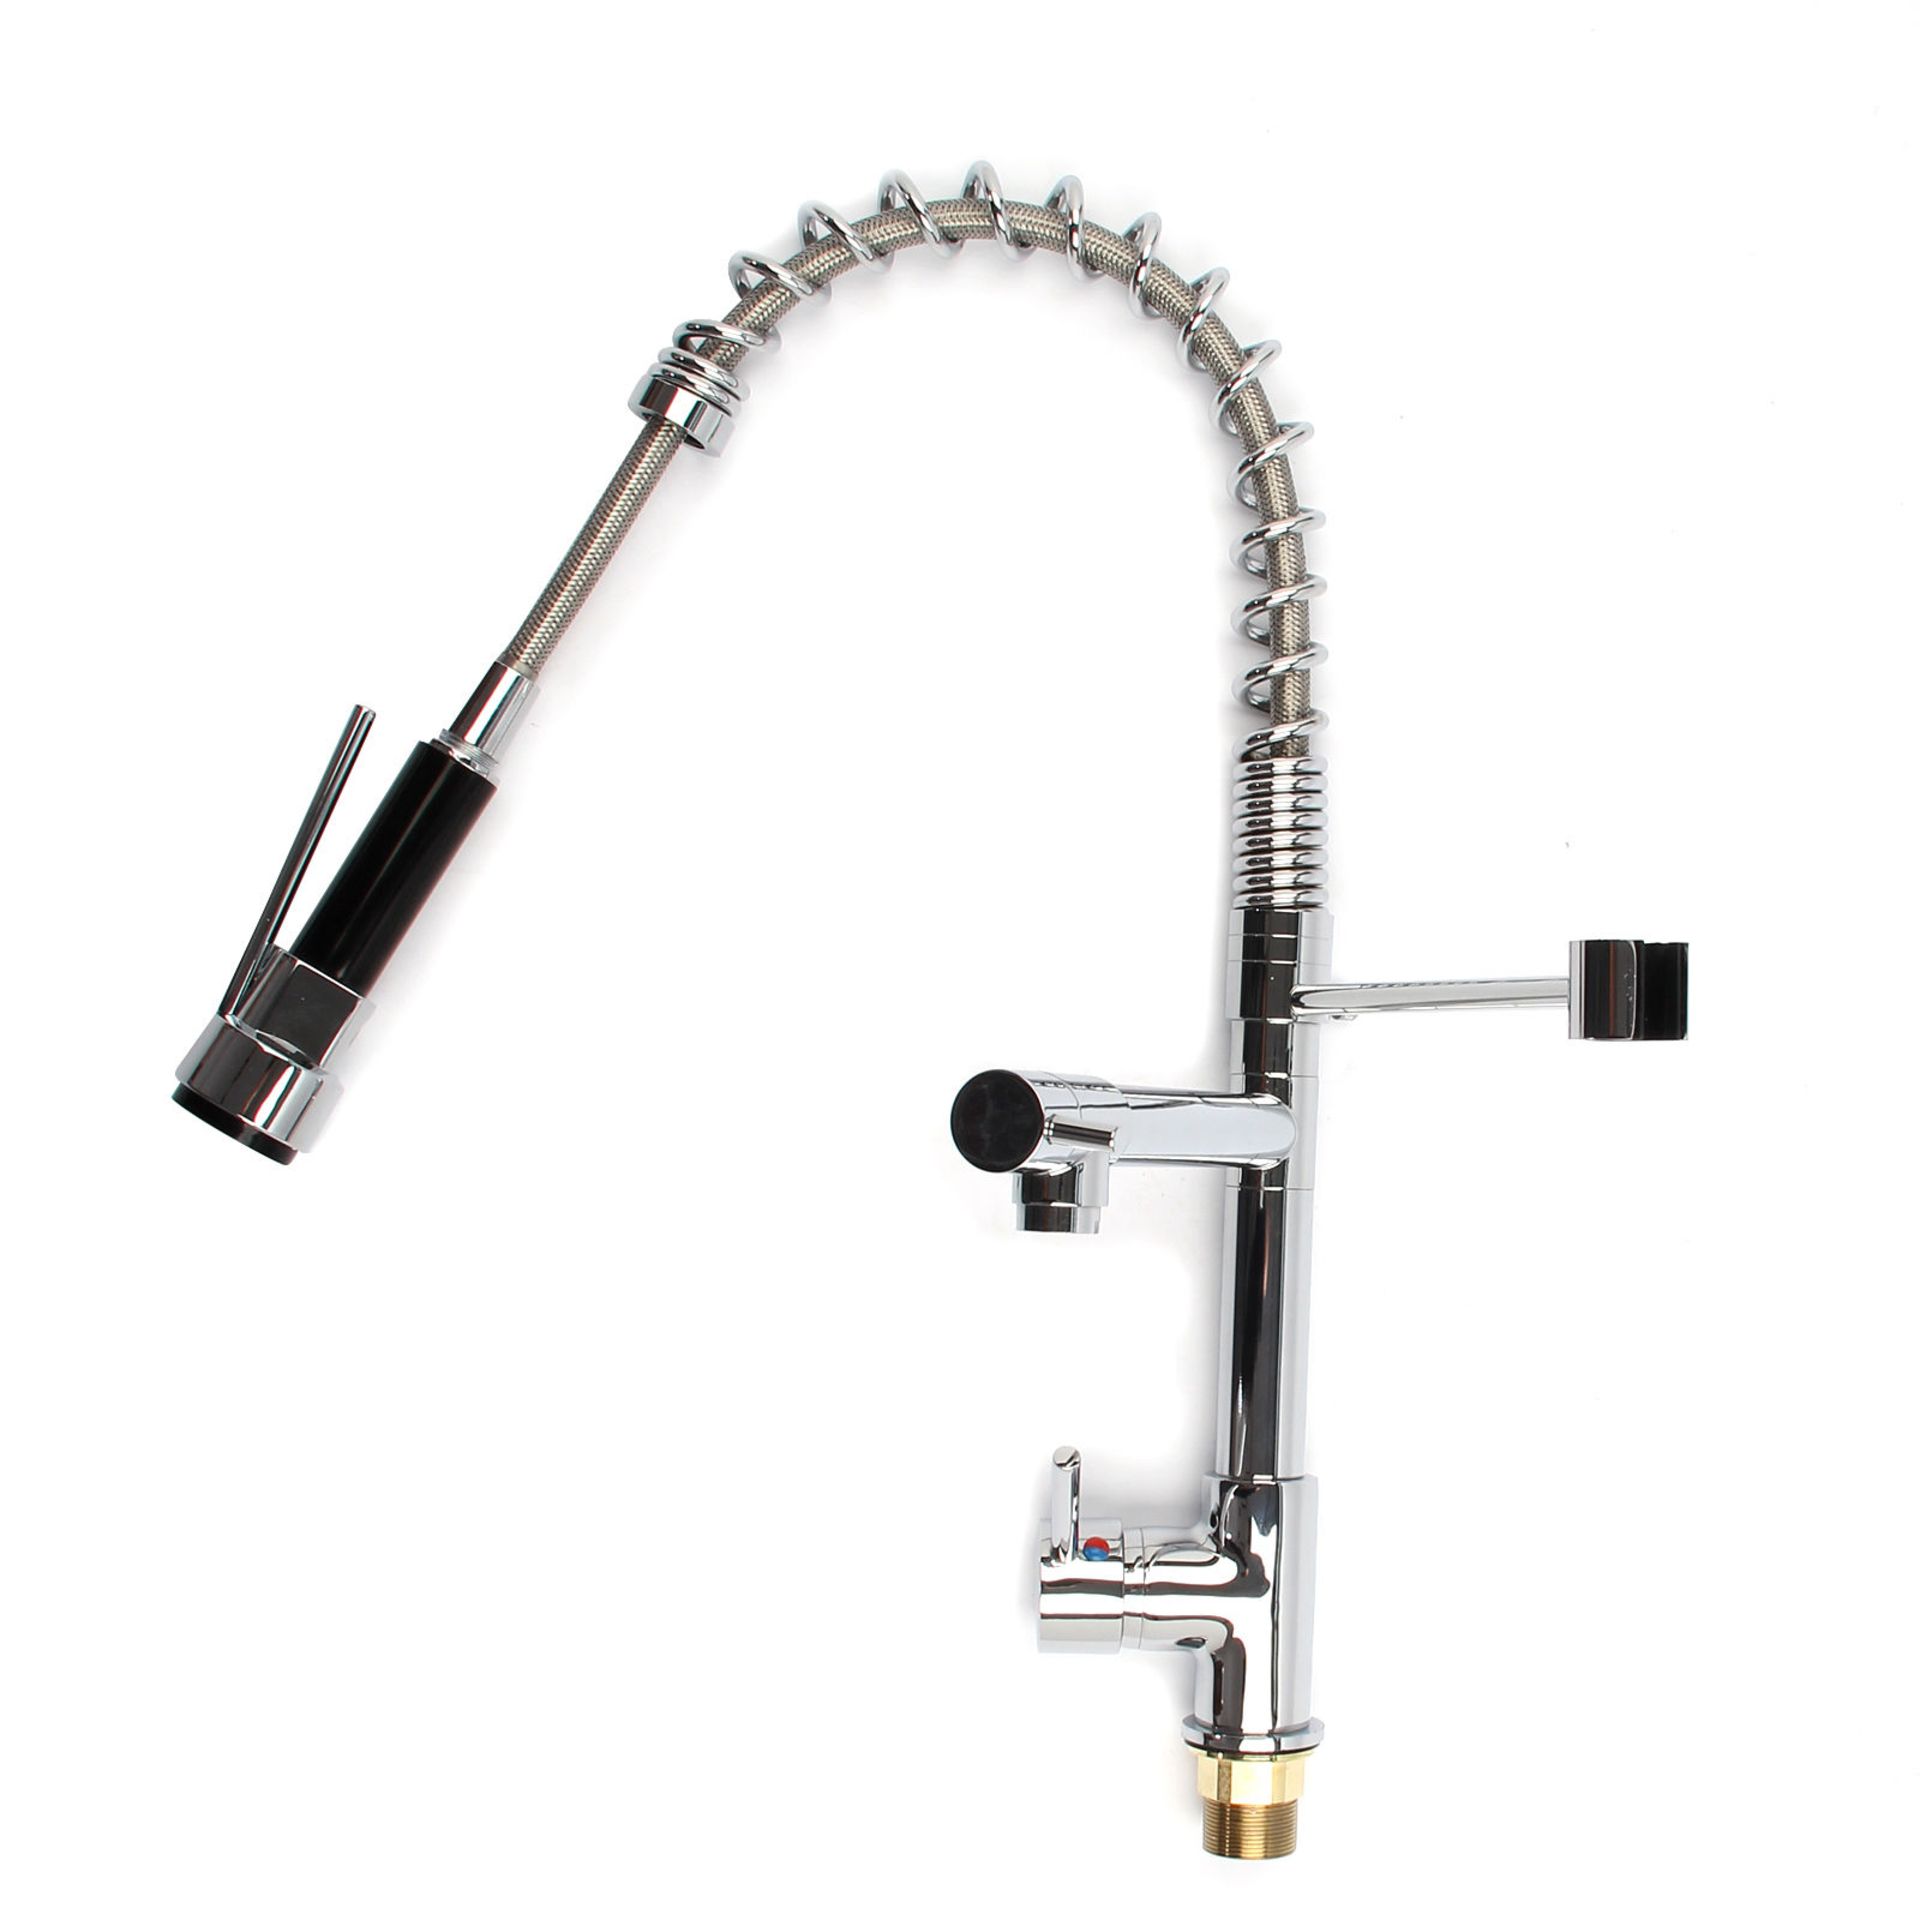 (MW191) Bentley Modern Monobloc Chrome Brass Pull Out Spray Mixer Tap. RRP £349.99. This tap is from - Bild 3 aus 6